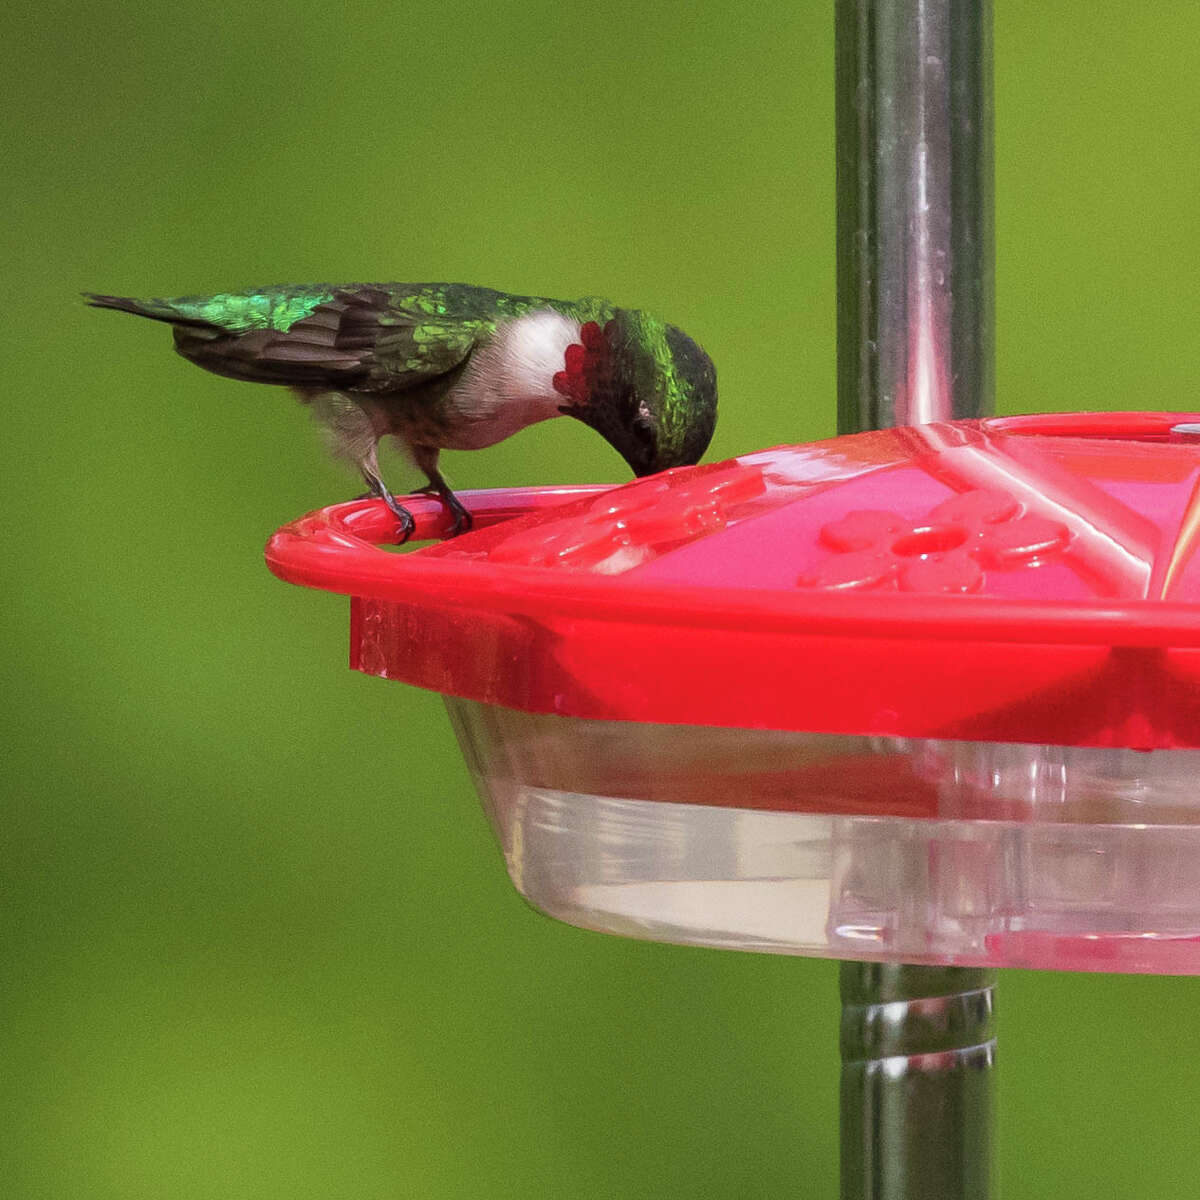 Local photographer Tom Voss captured photos of birds, like the ruby-throated humming bird, in his backyard recently.